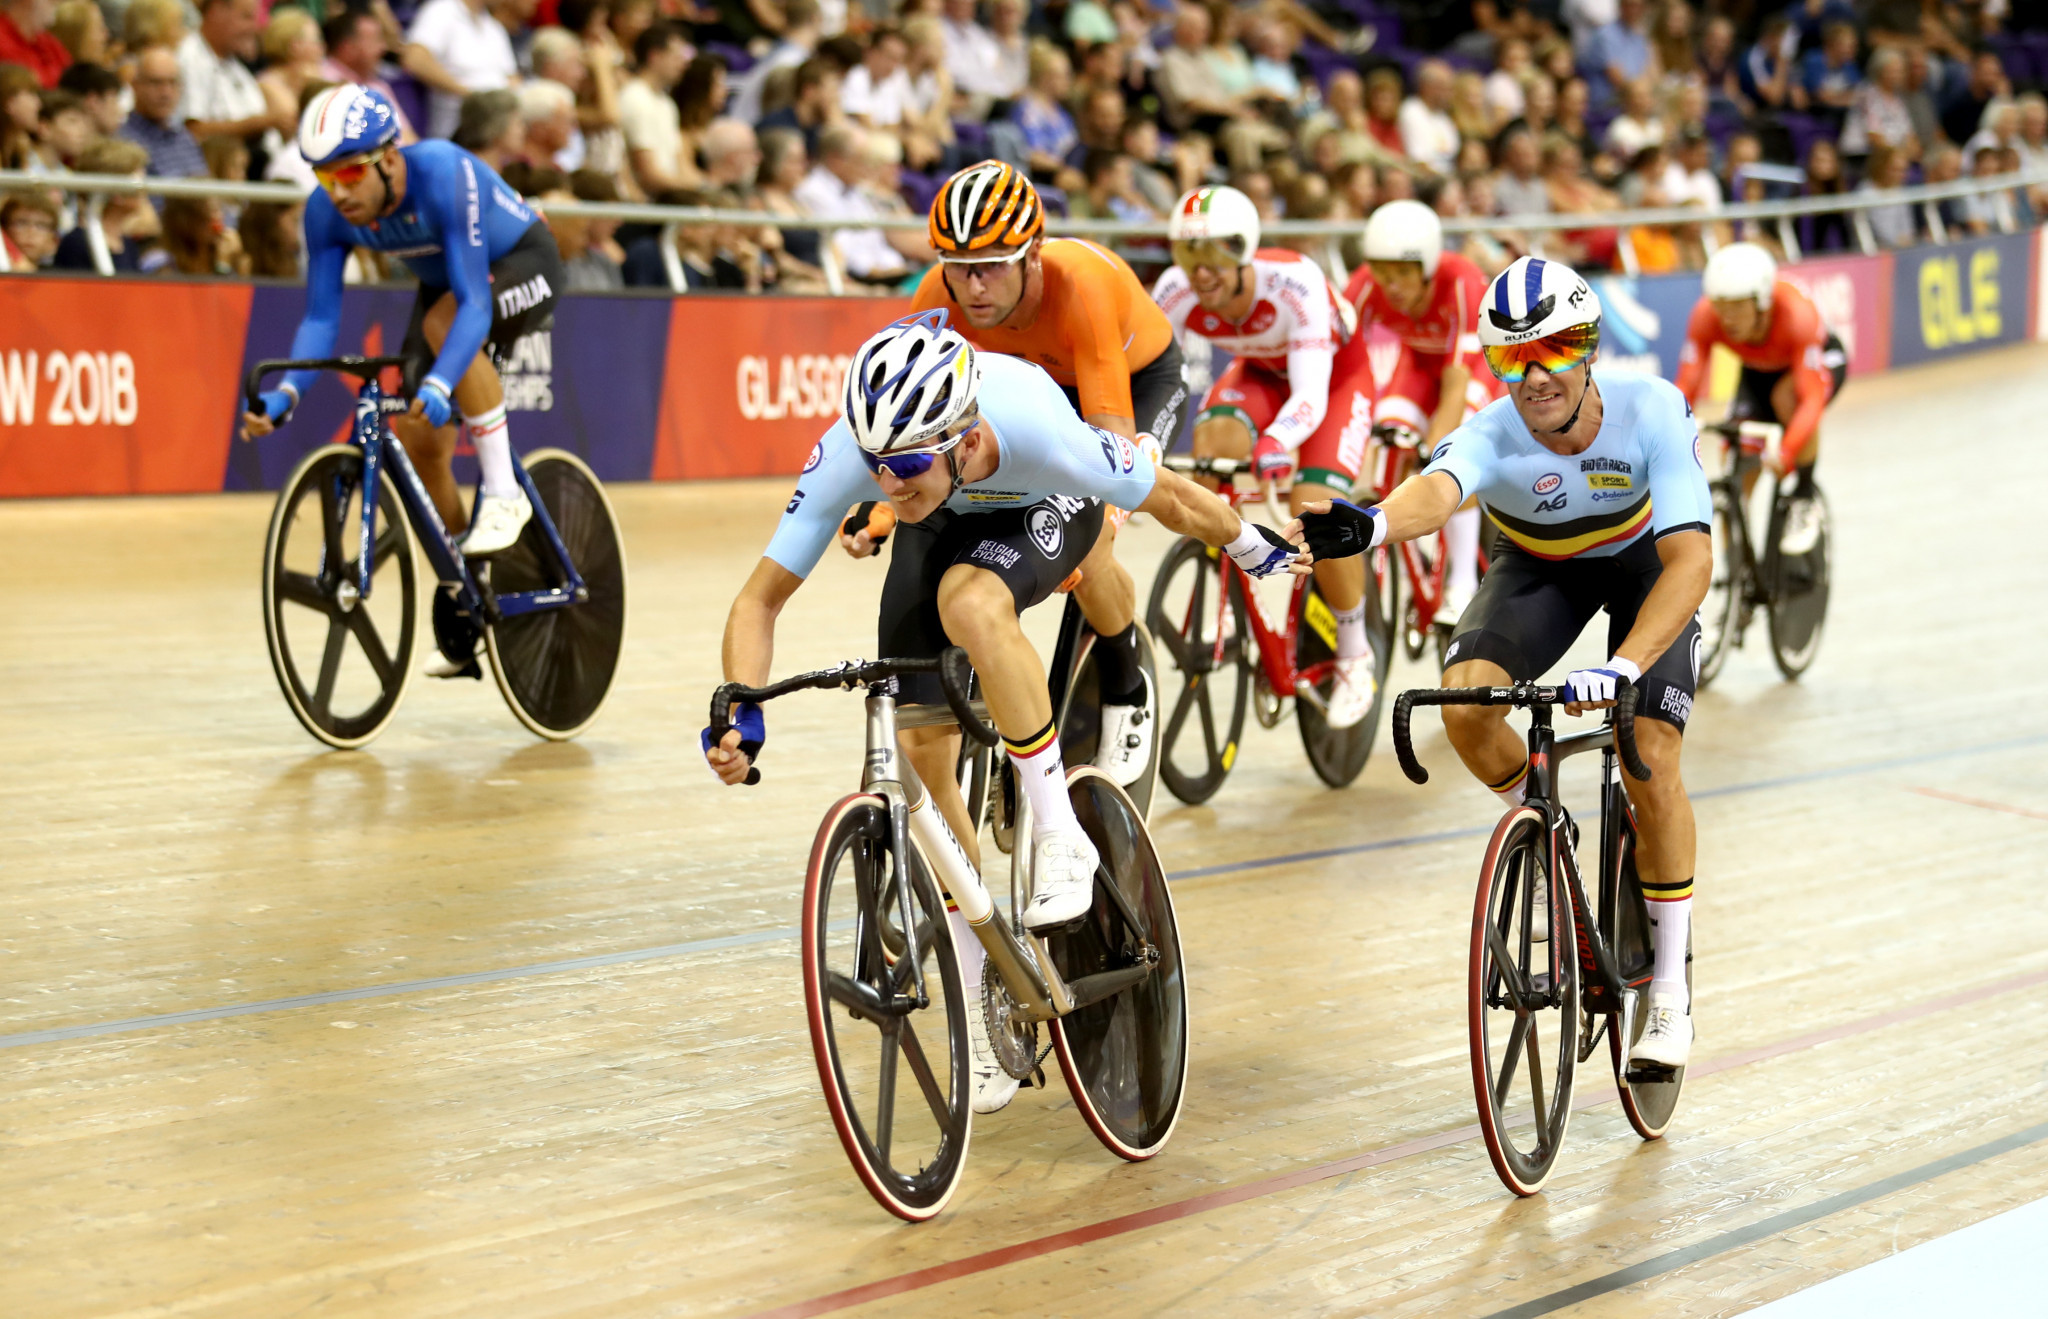 Belgium's Kenny De Ketele and Robbe Ghys won the men’s madison competition ©Getty Images